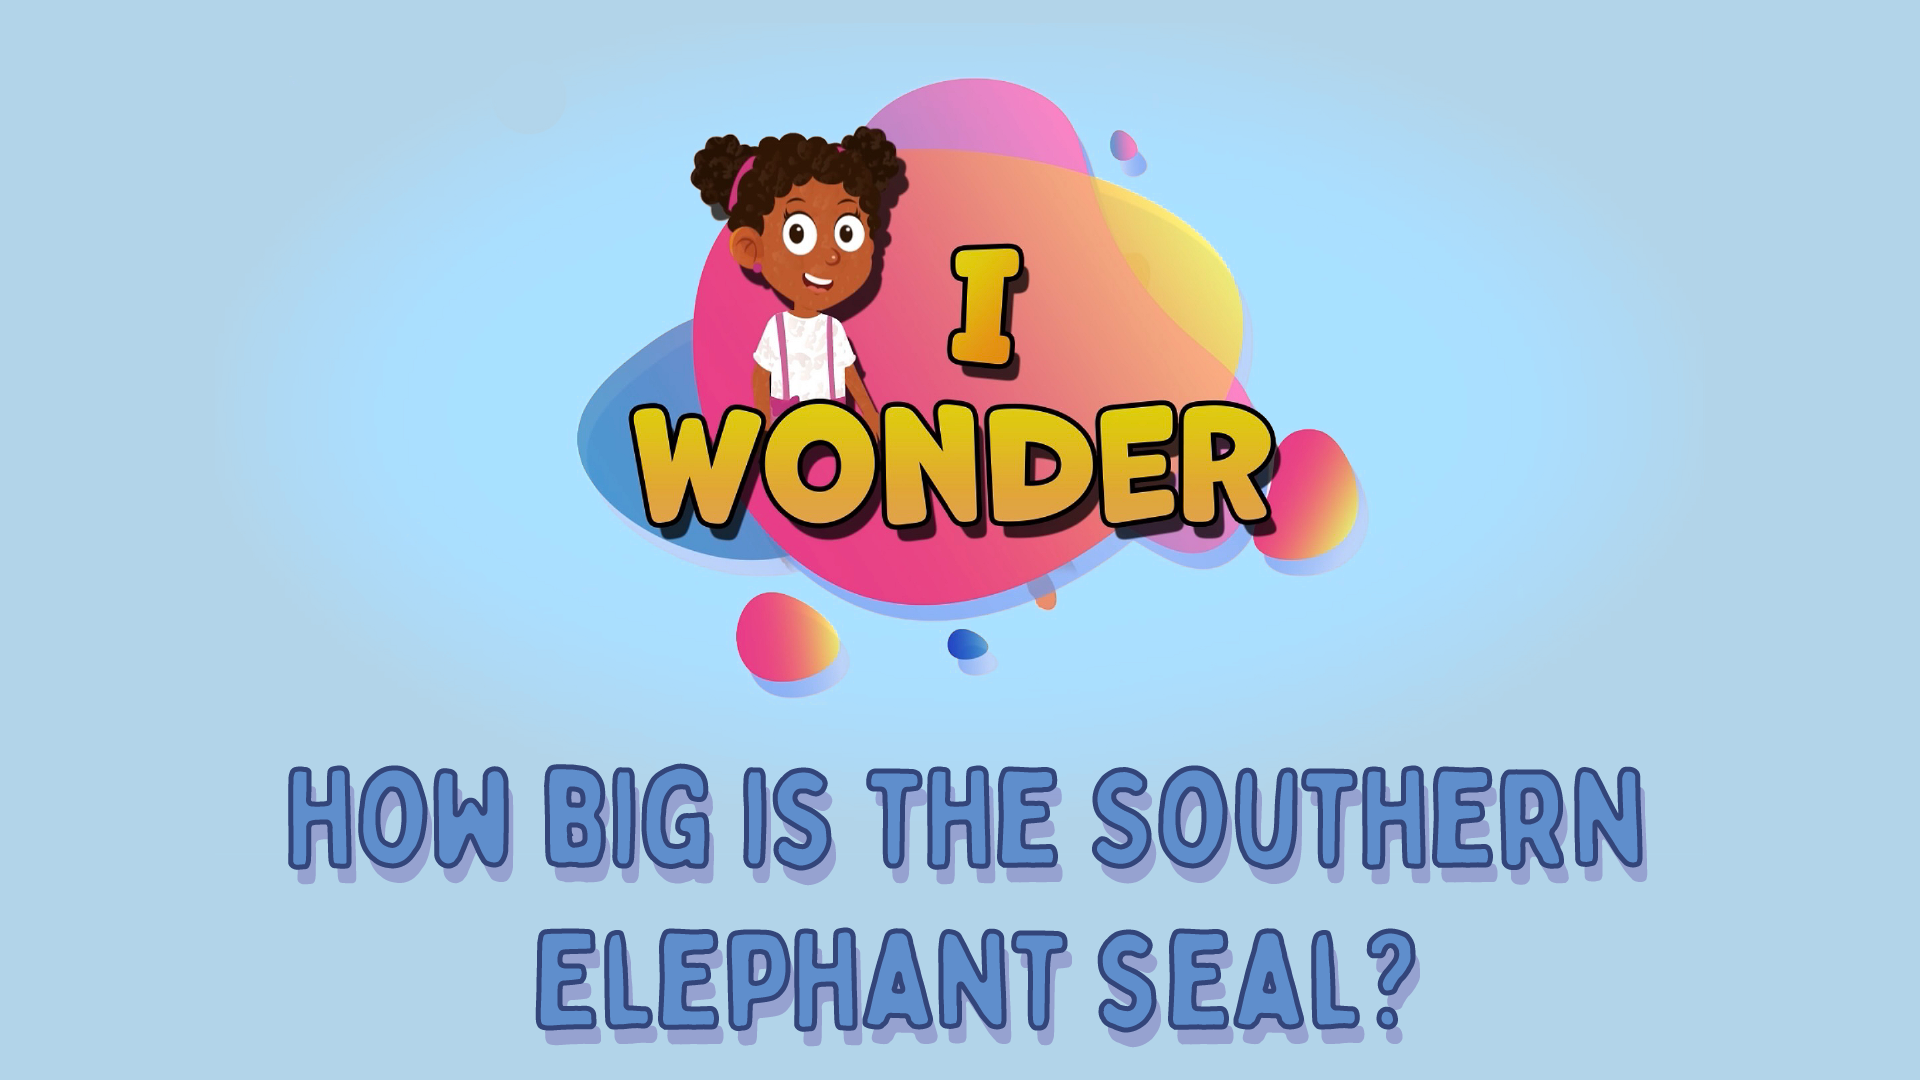 How Big Is The Southern Elephant Seal?